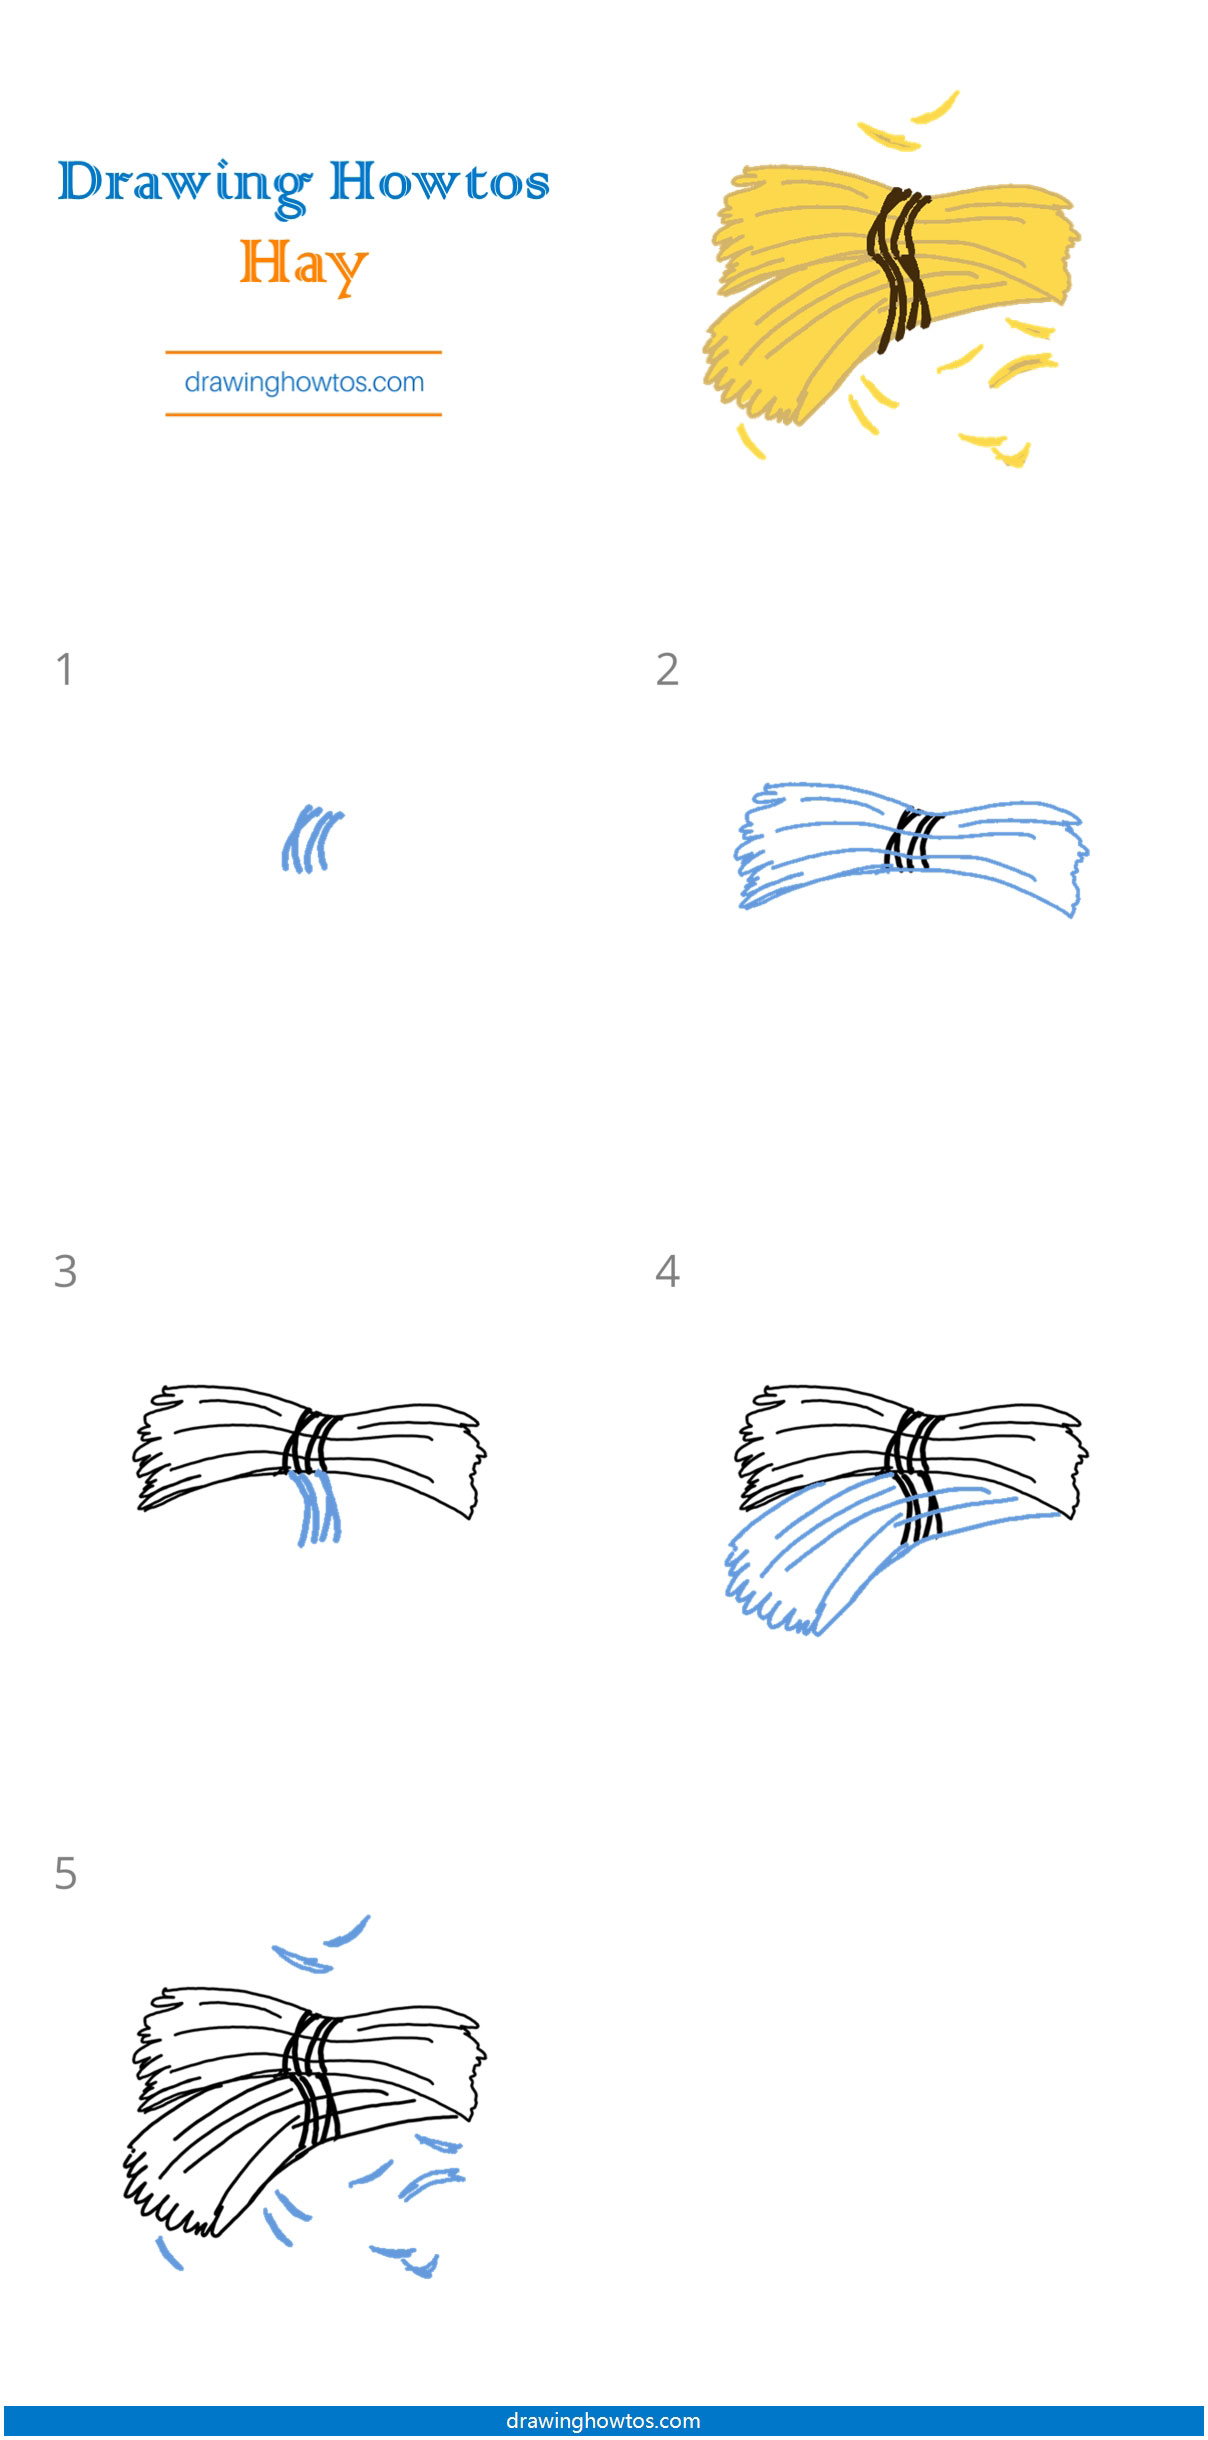 How to Draw Hay Step by Step